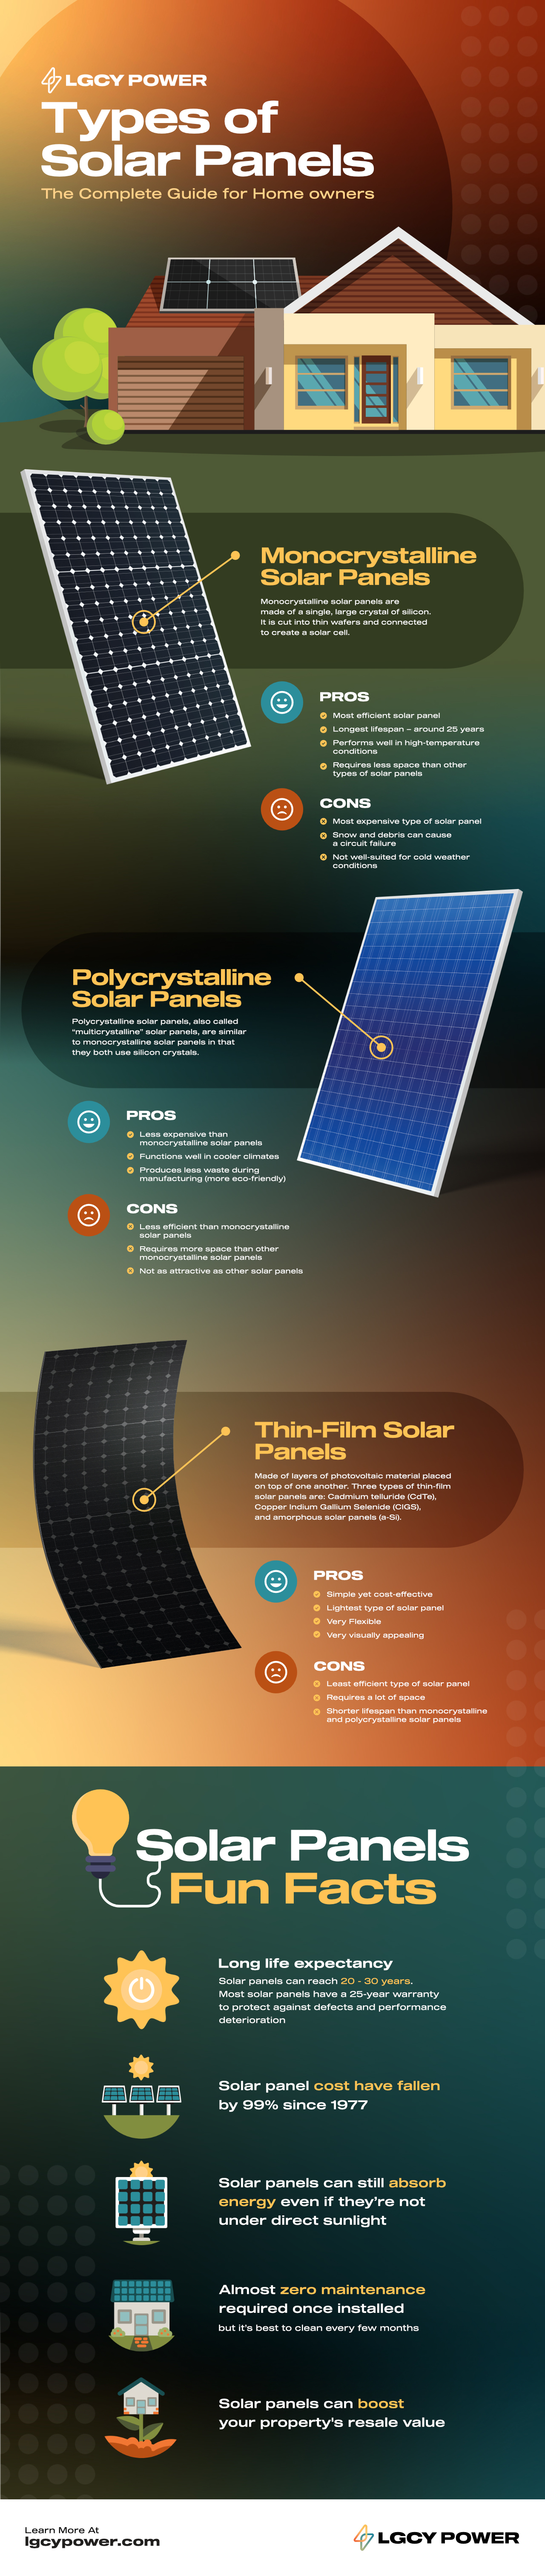 Types of solar panels infographic